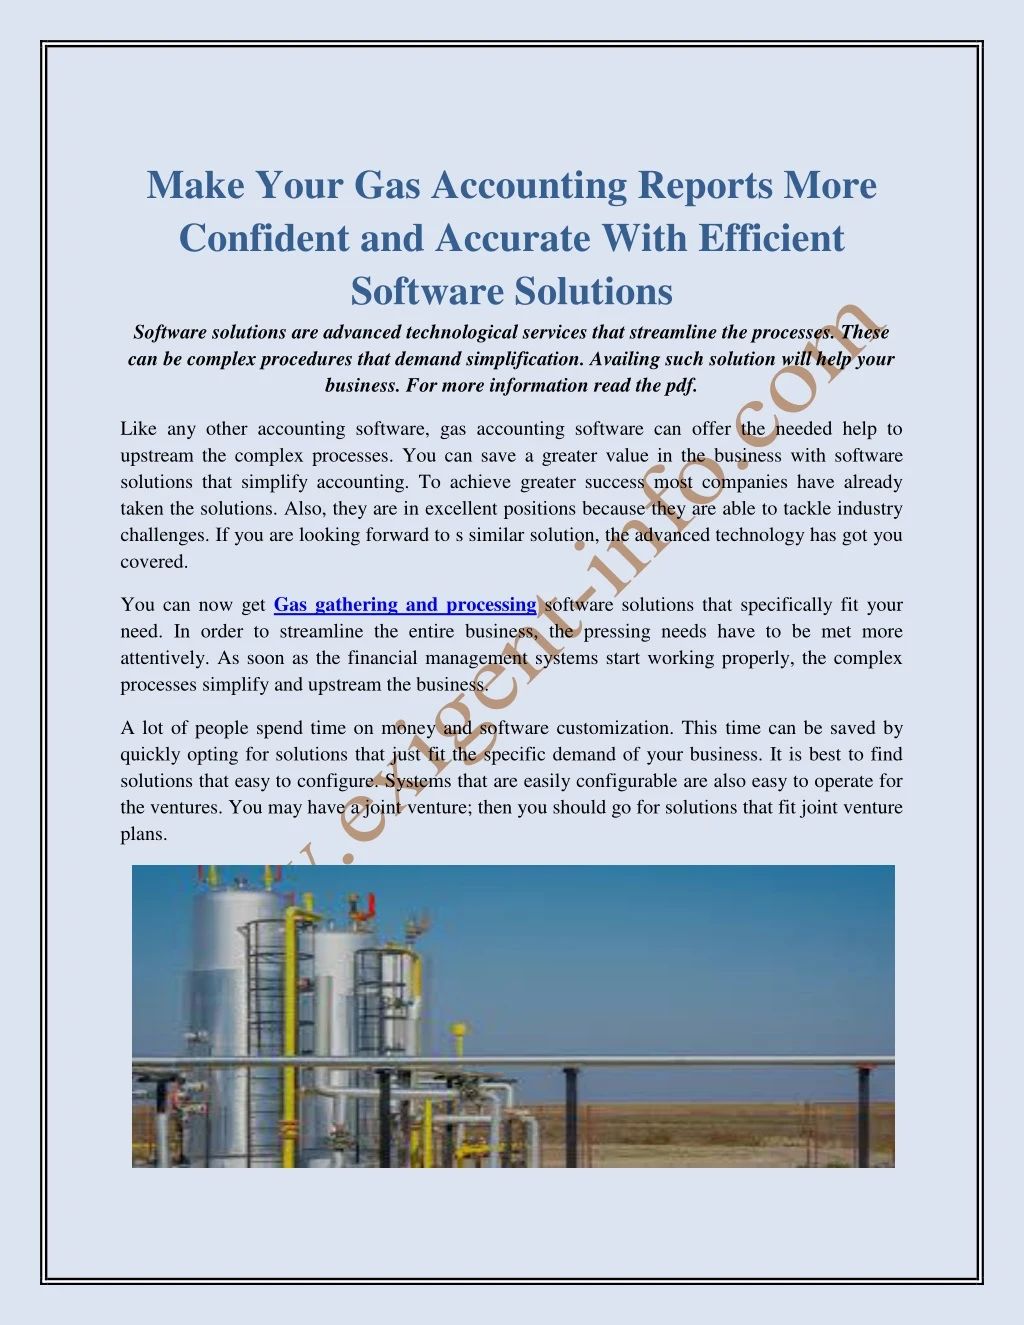 make your gas accounting reports more confident